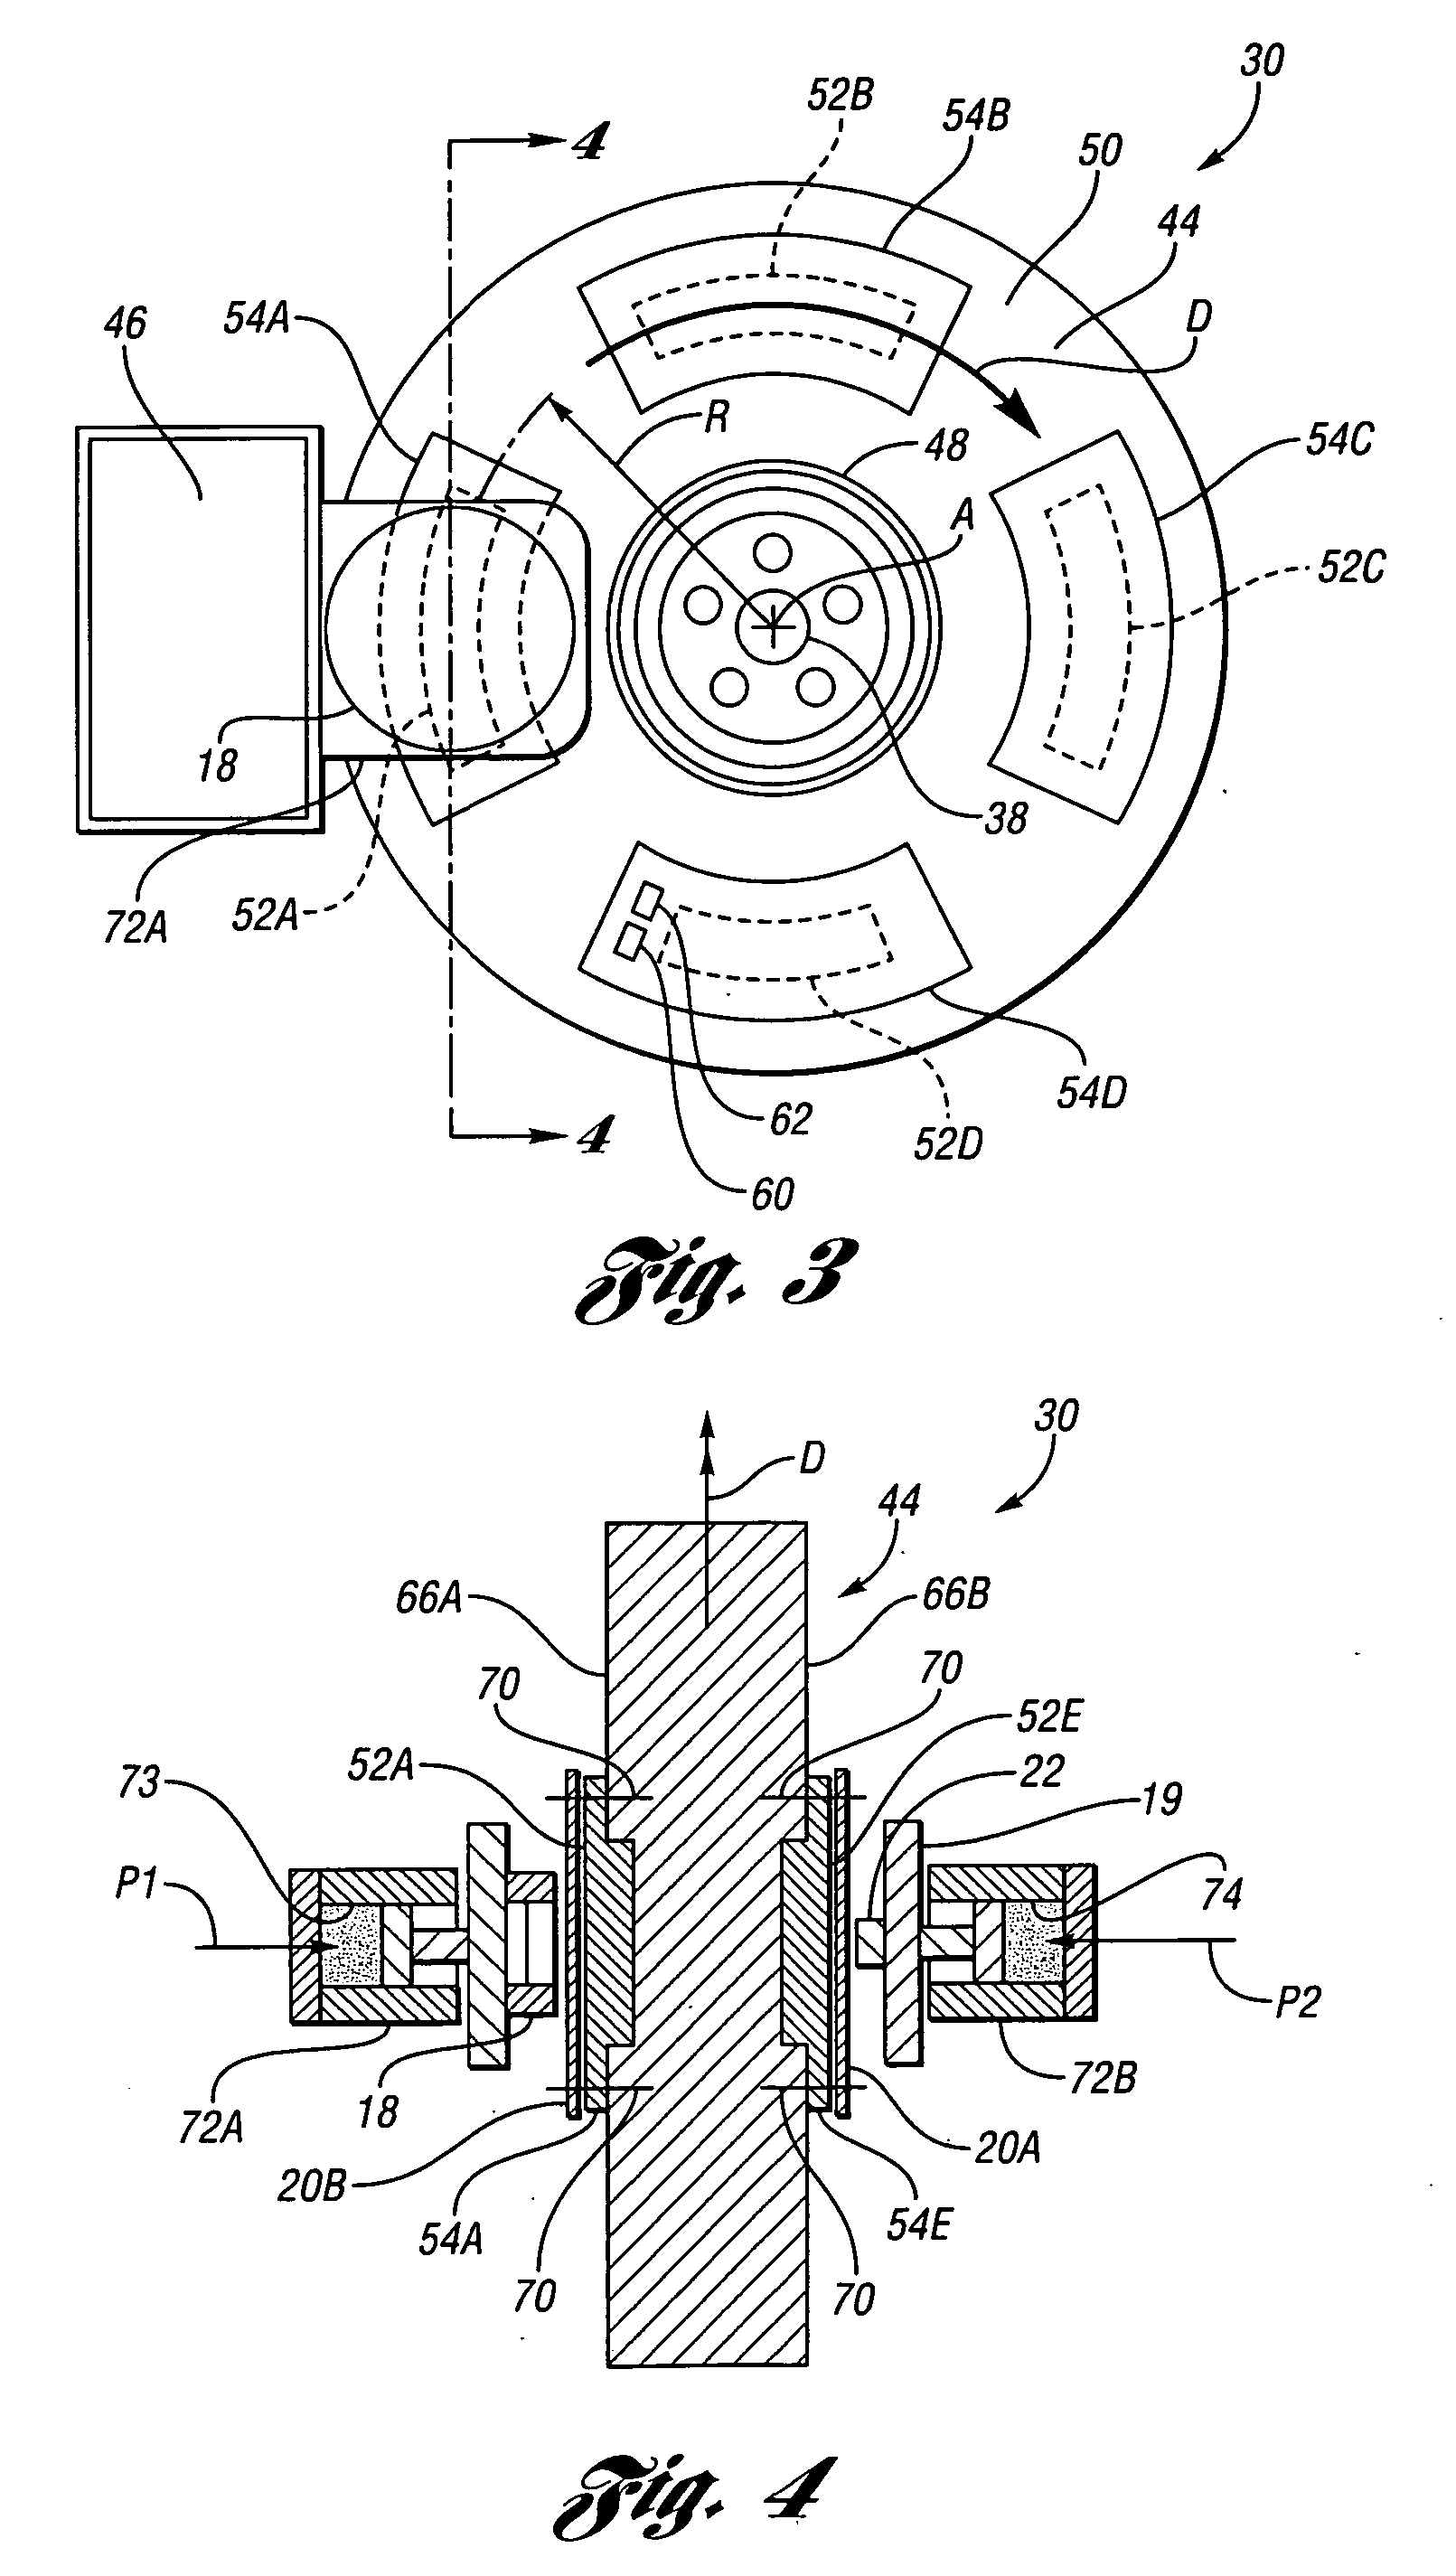 Test apparatus and method of measuring surface friction of a brake pad insulator material and method of use of a brake dynamometer